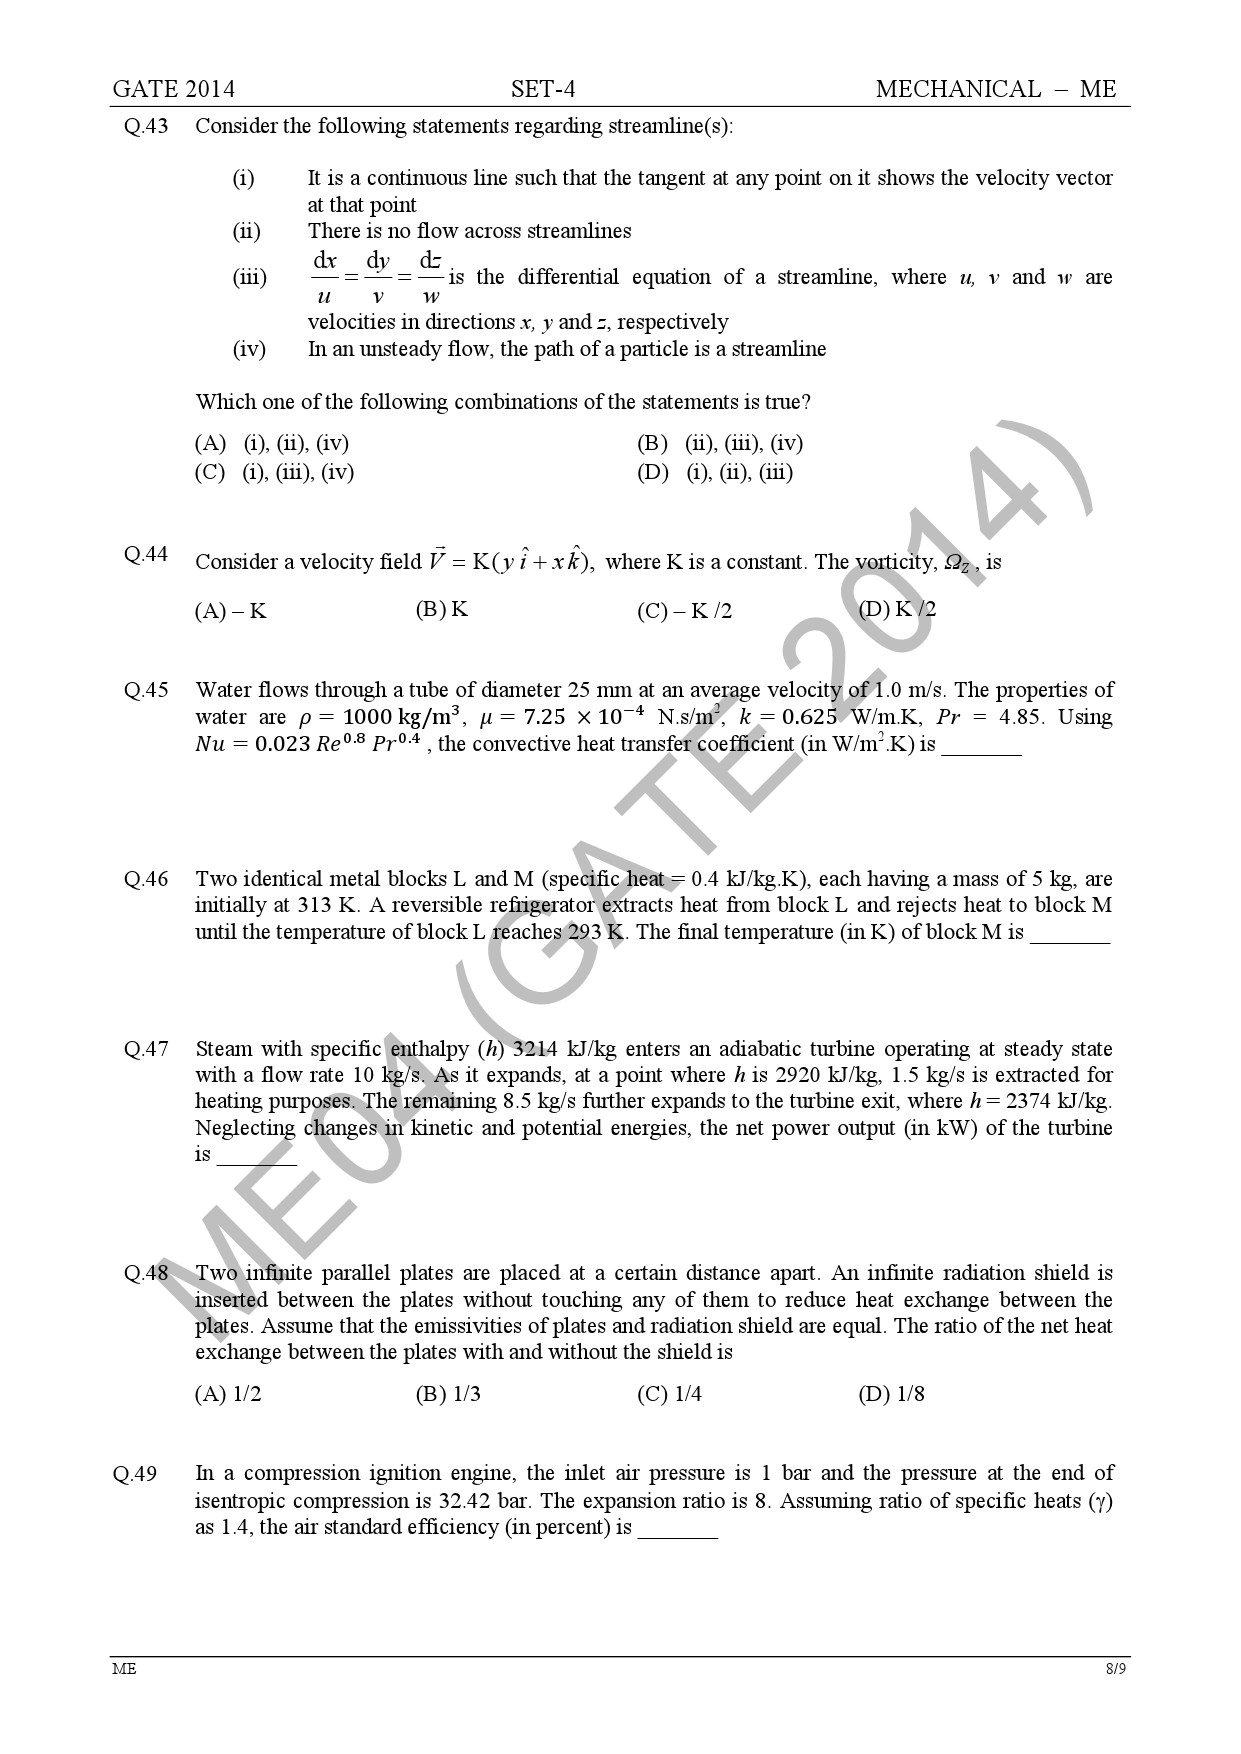 GATE Exam Question Paper 2014 Mechanical Engineering Set 4 14